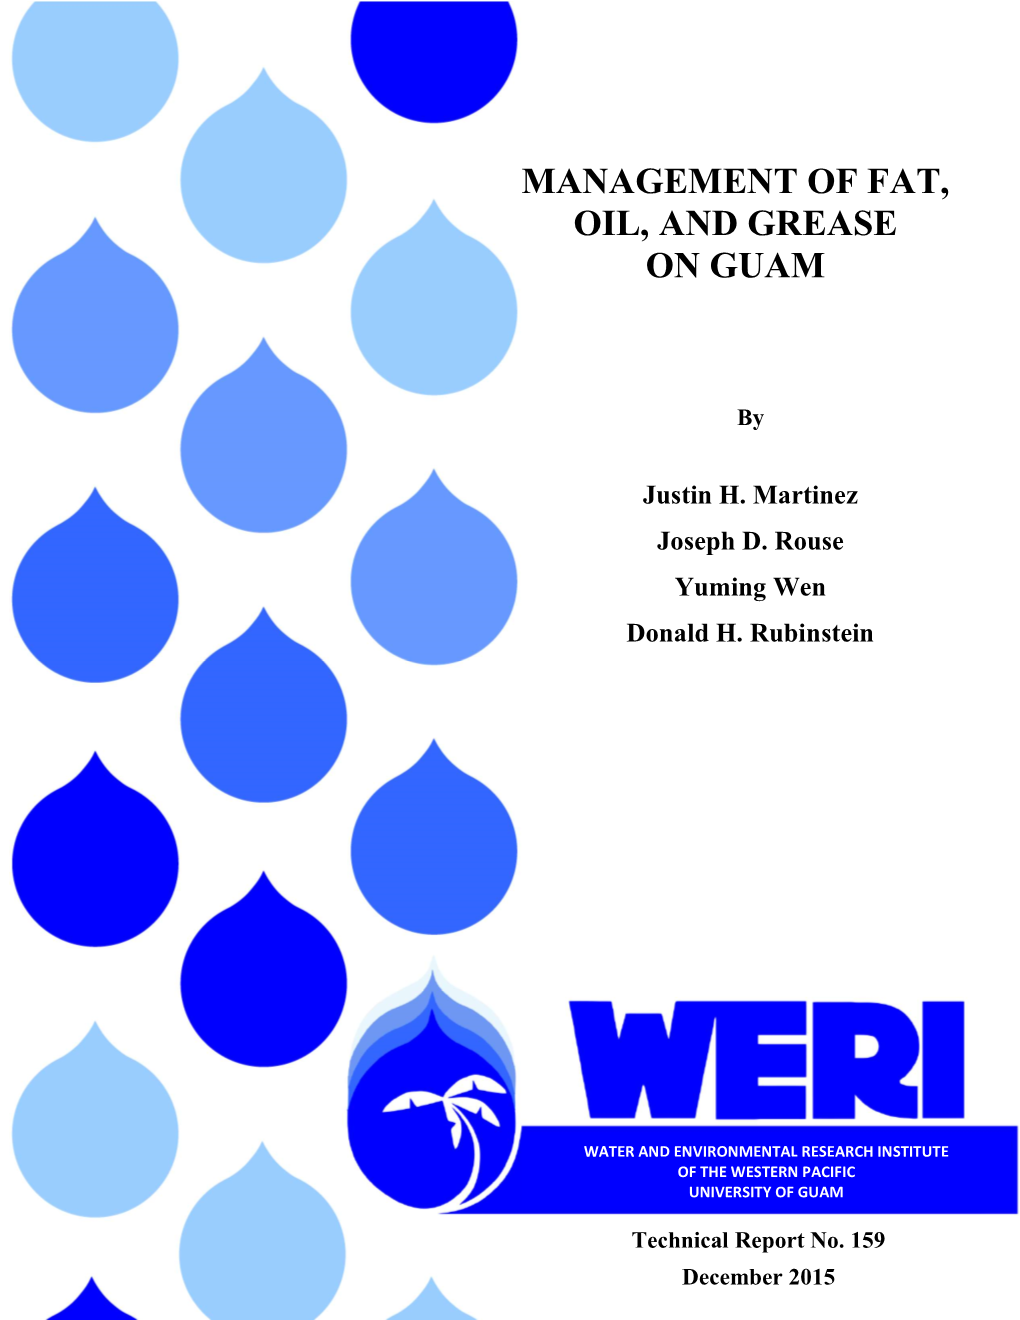 Management of Fat, Oil, and Grease on Guam